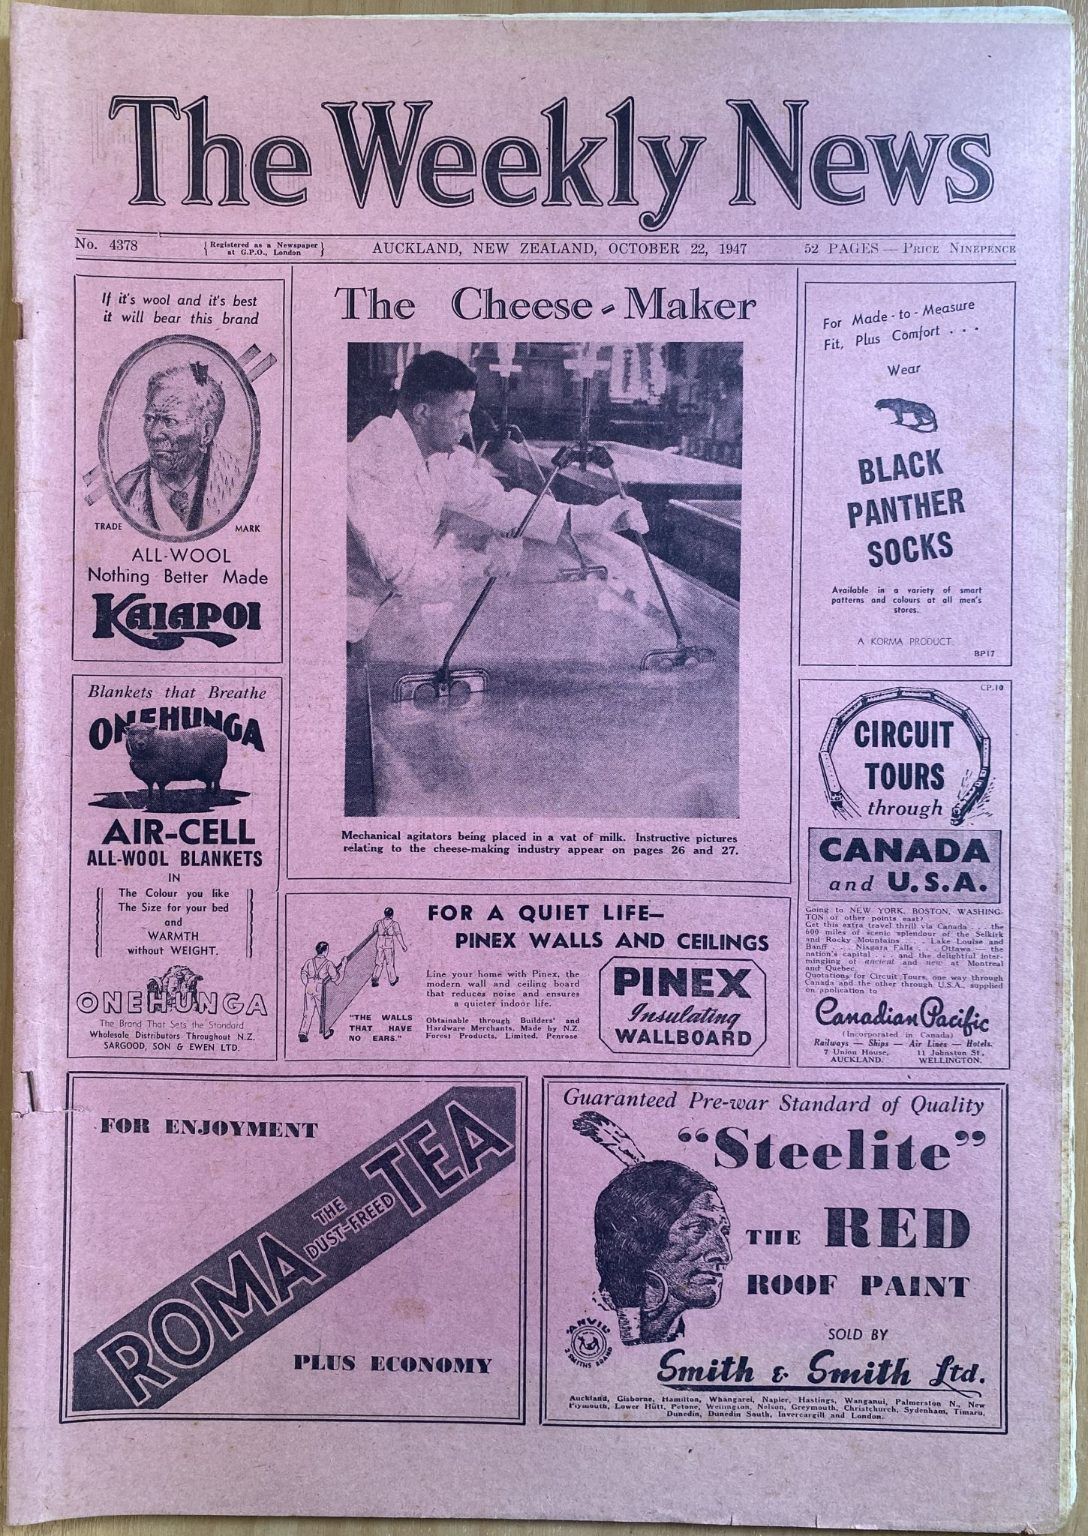 OLD NEWSPAPER: The Weekly News, No. 4378, 22 October 1947